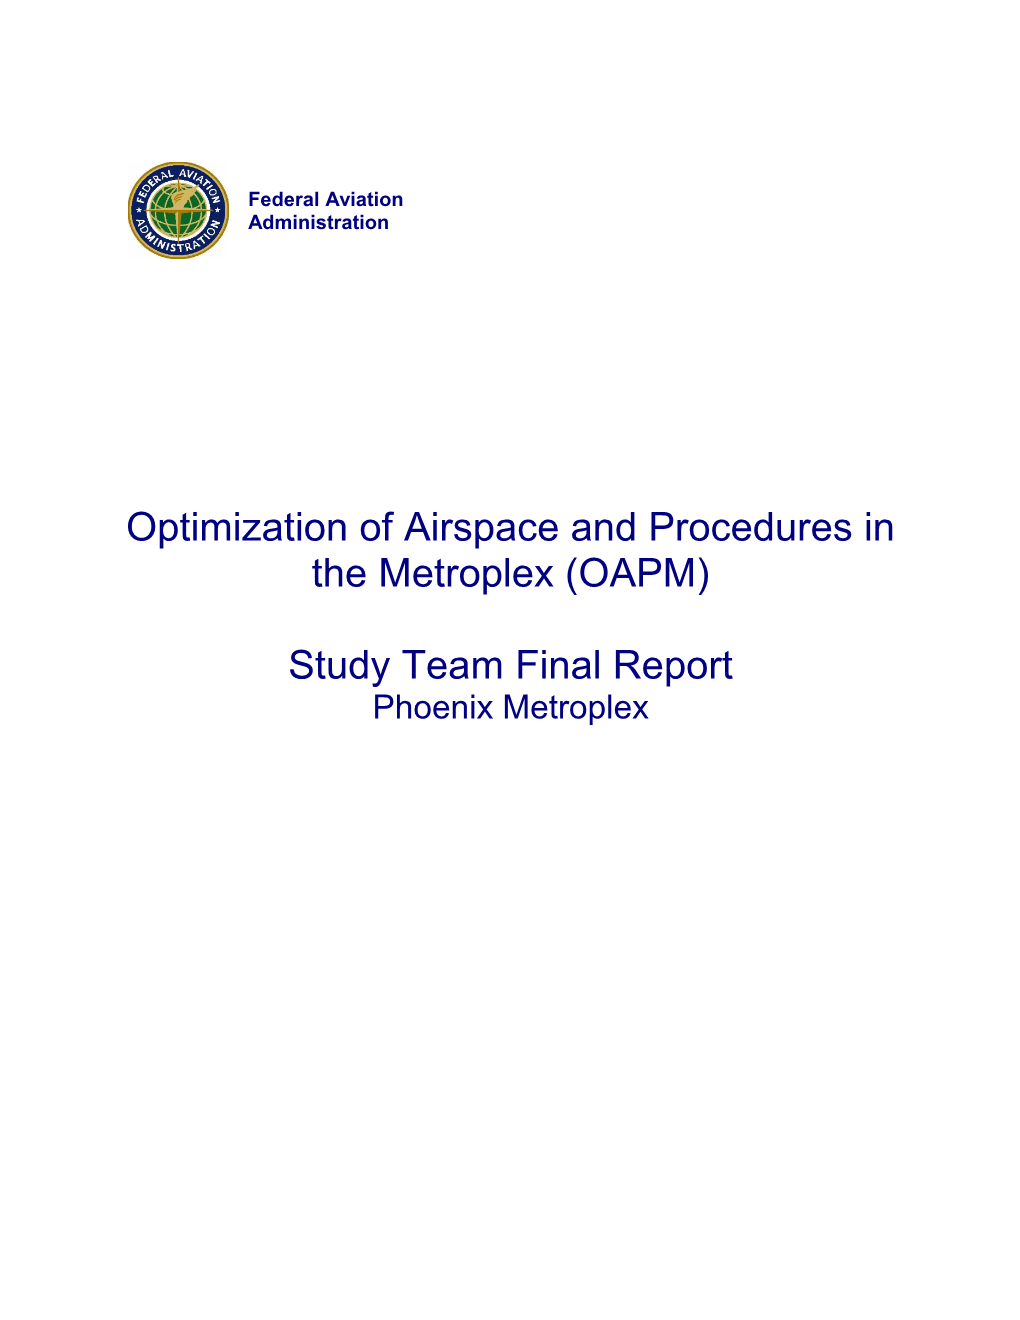 Optimization of Airspace and Procedures in the Metroplex (OAPM)